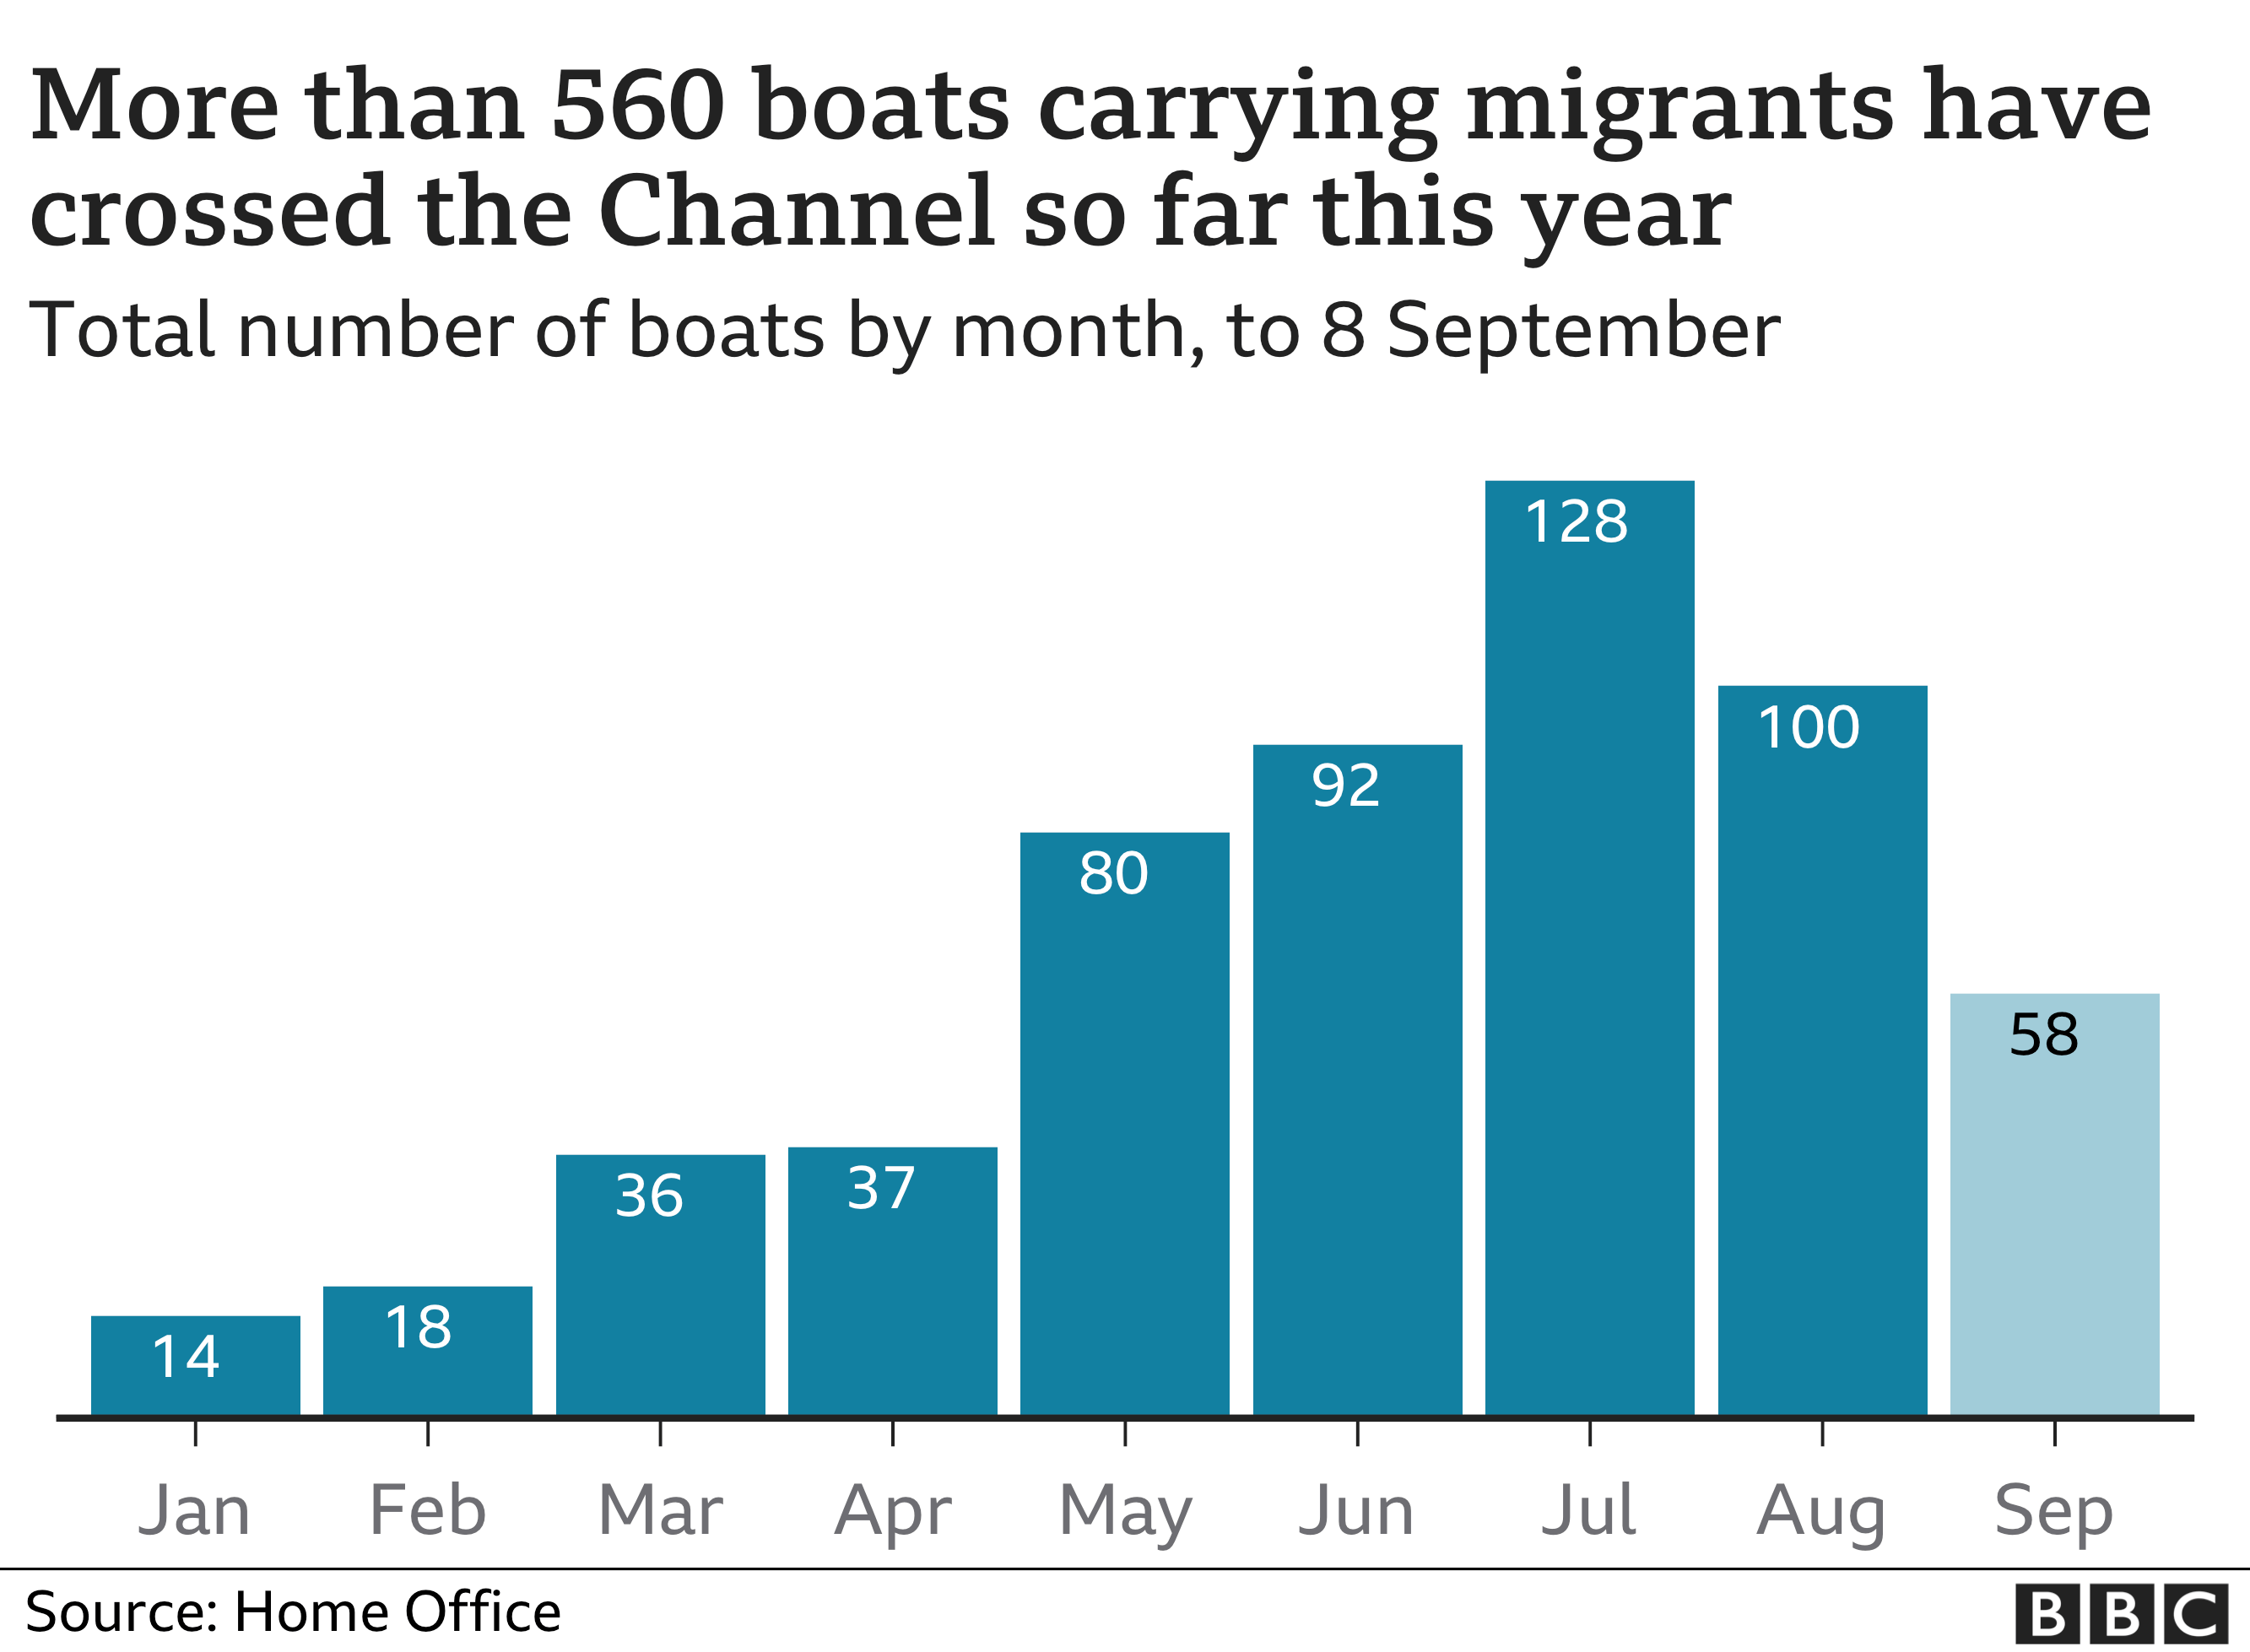 Chart showing the number of boats carrying migrants reaching the UK